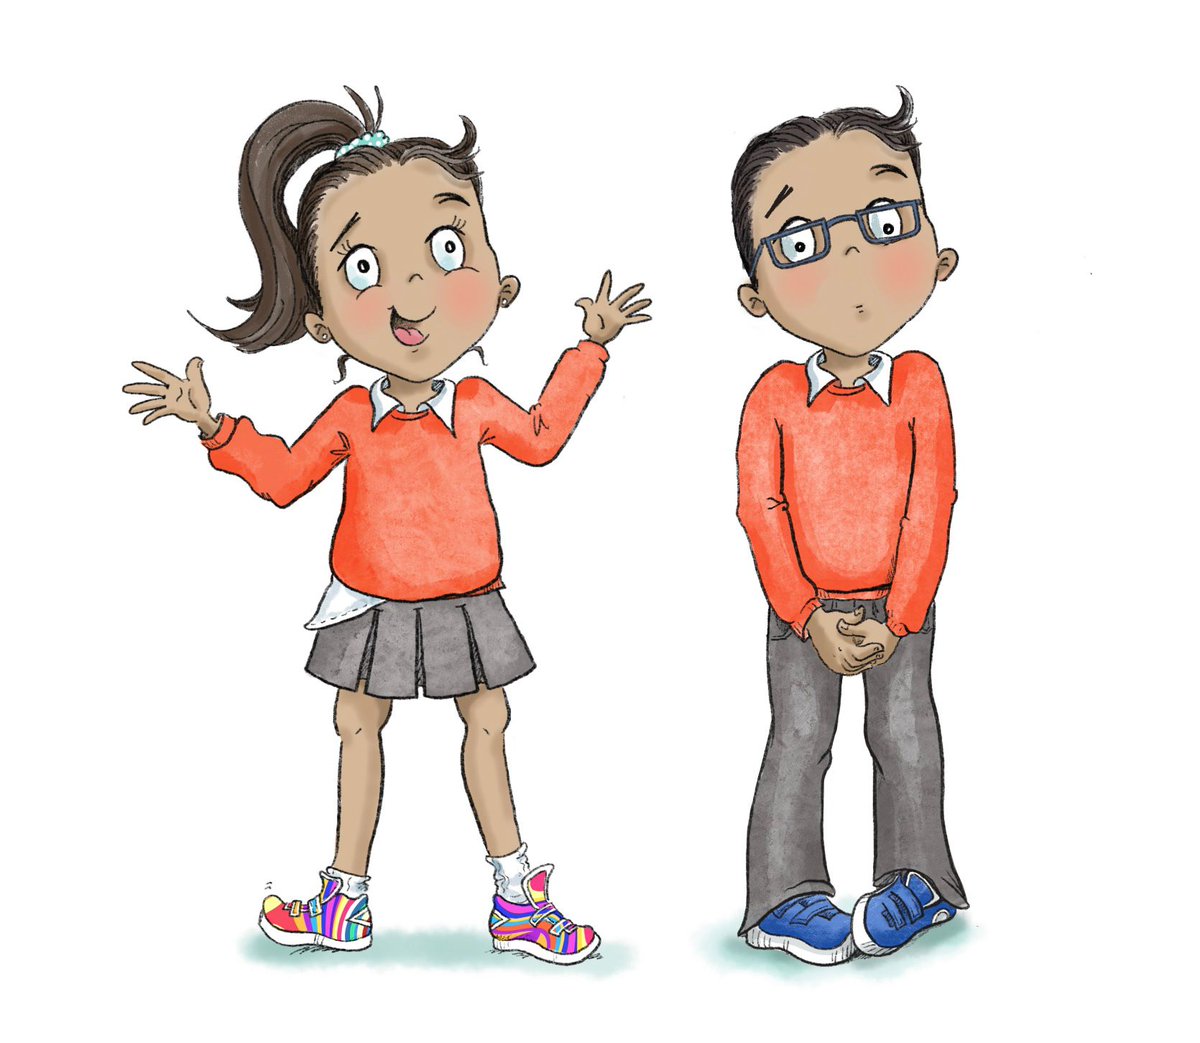 So excited to show the two main characters of my upcoming children’s book about #Autism! 🤩 “Do We Look Autistic?”, co-produced with @WiganCouncil’s @Autism_Friends board, challenges stereotypes & stigmas in a child-friendly way. 🔜 Follow for updates! 📚 #ChildrensBookWeek